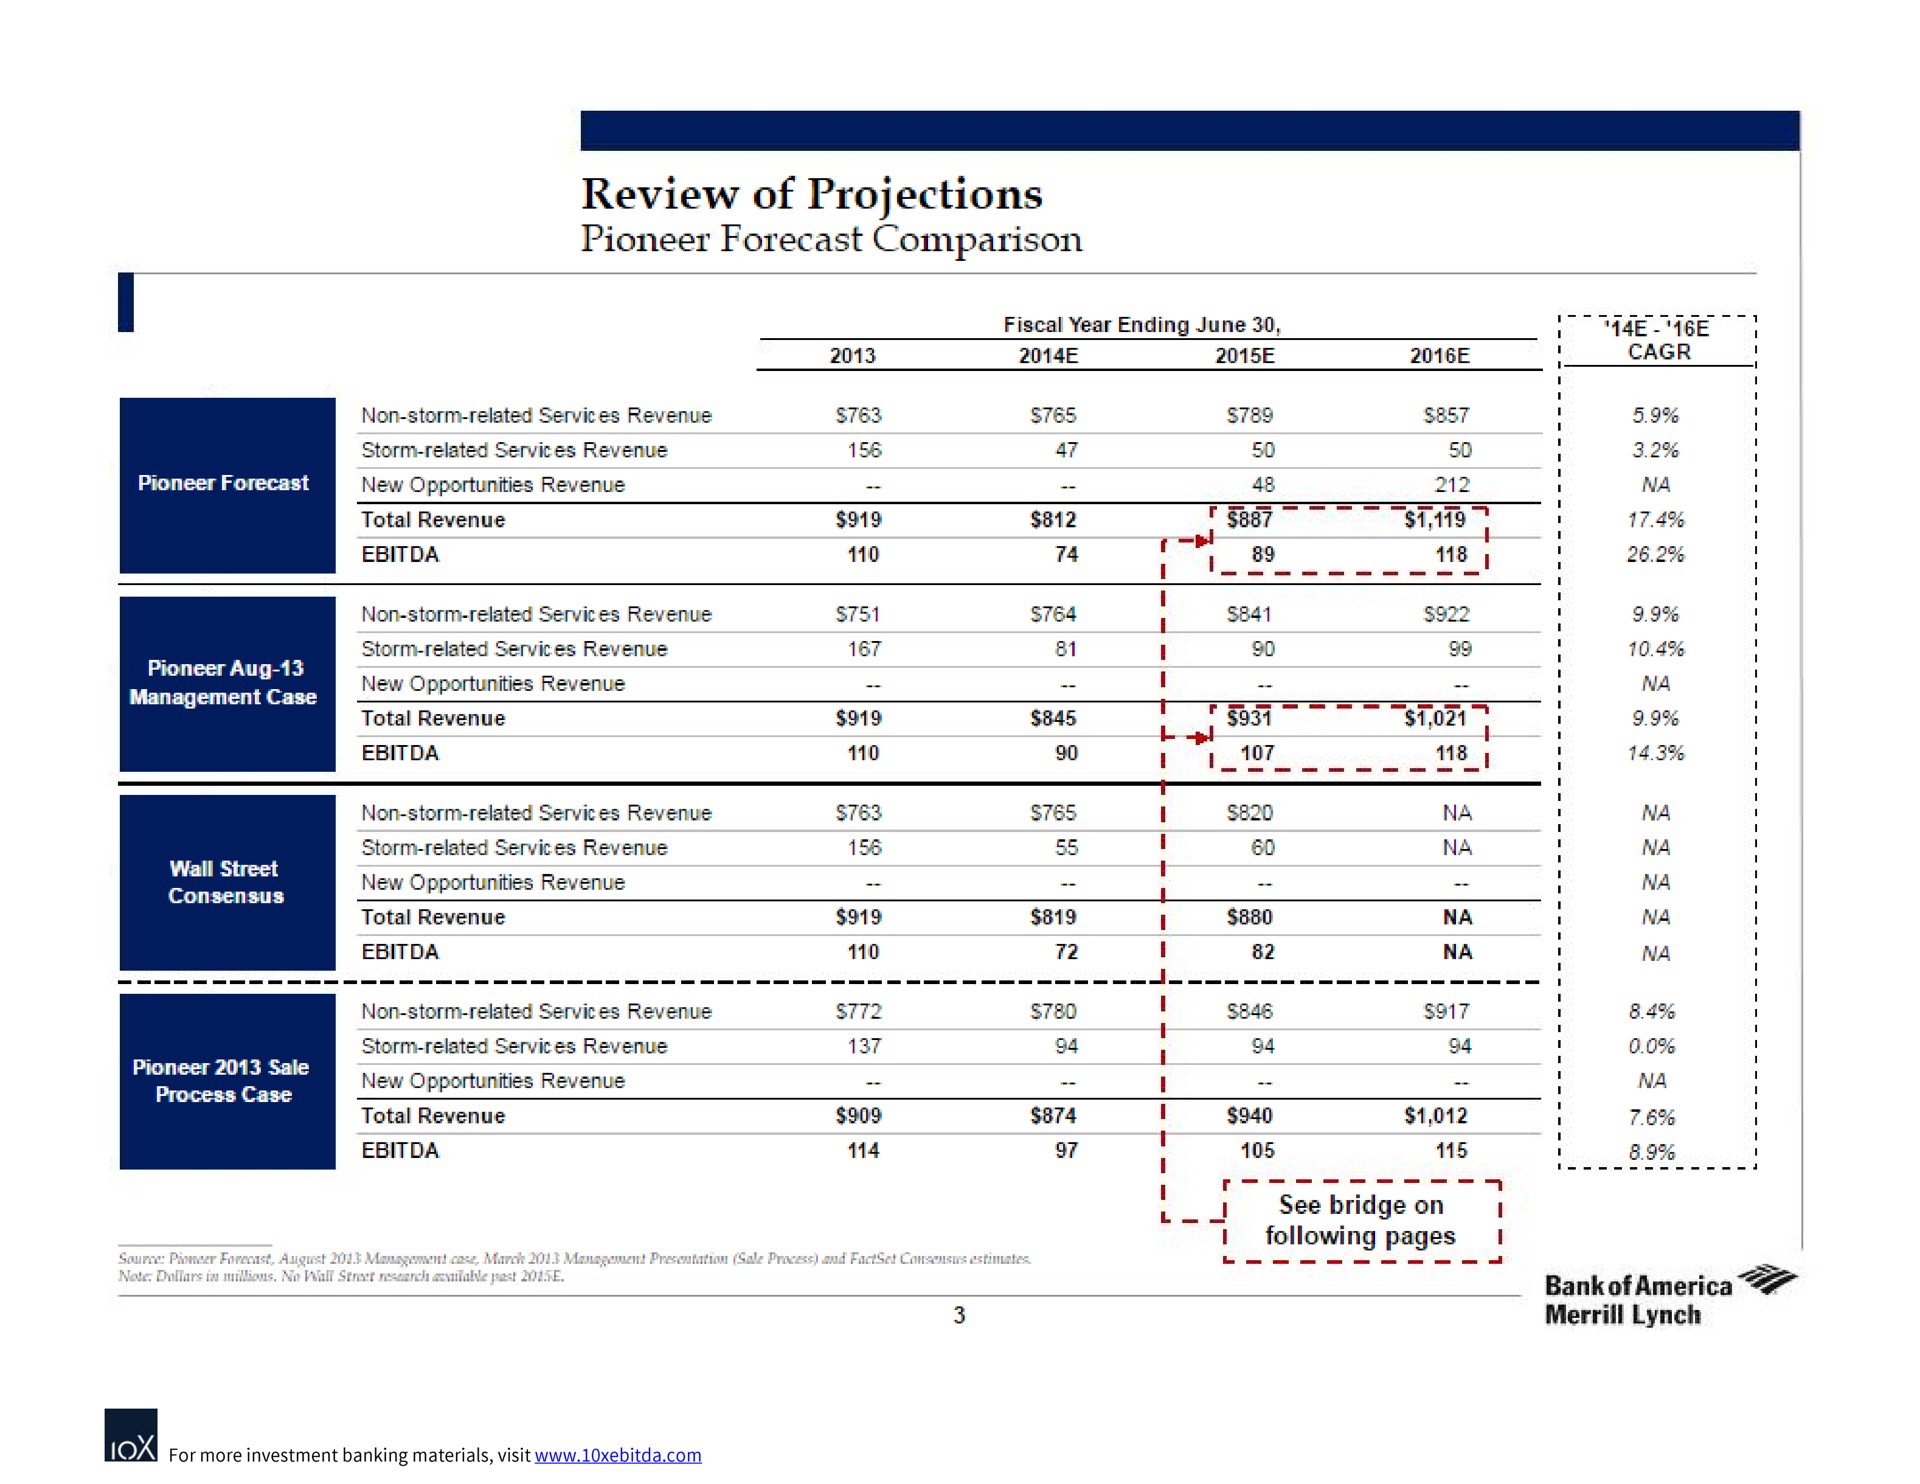 review of projections pioneer forecast comparison | Bank of America